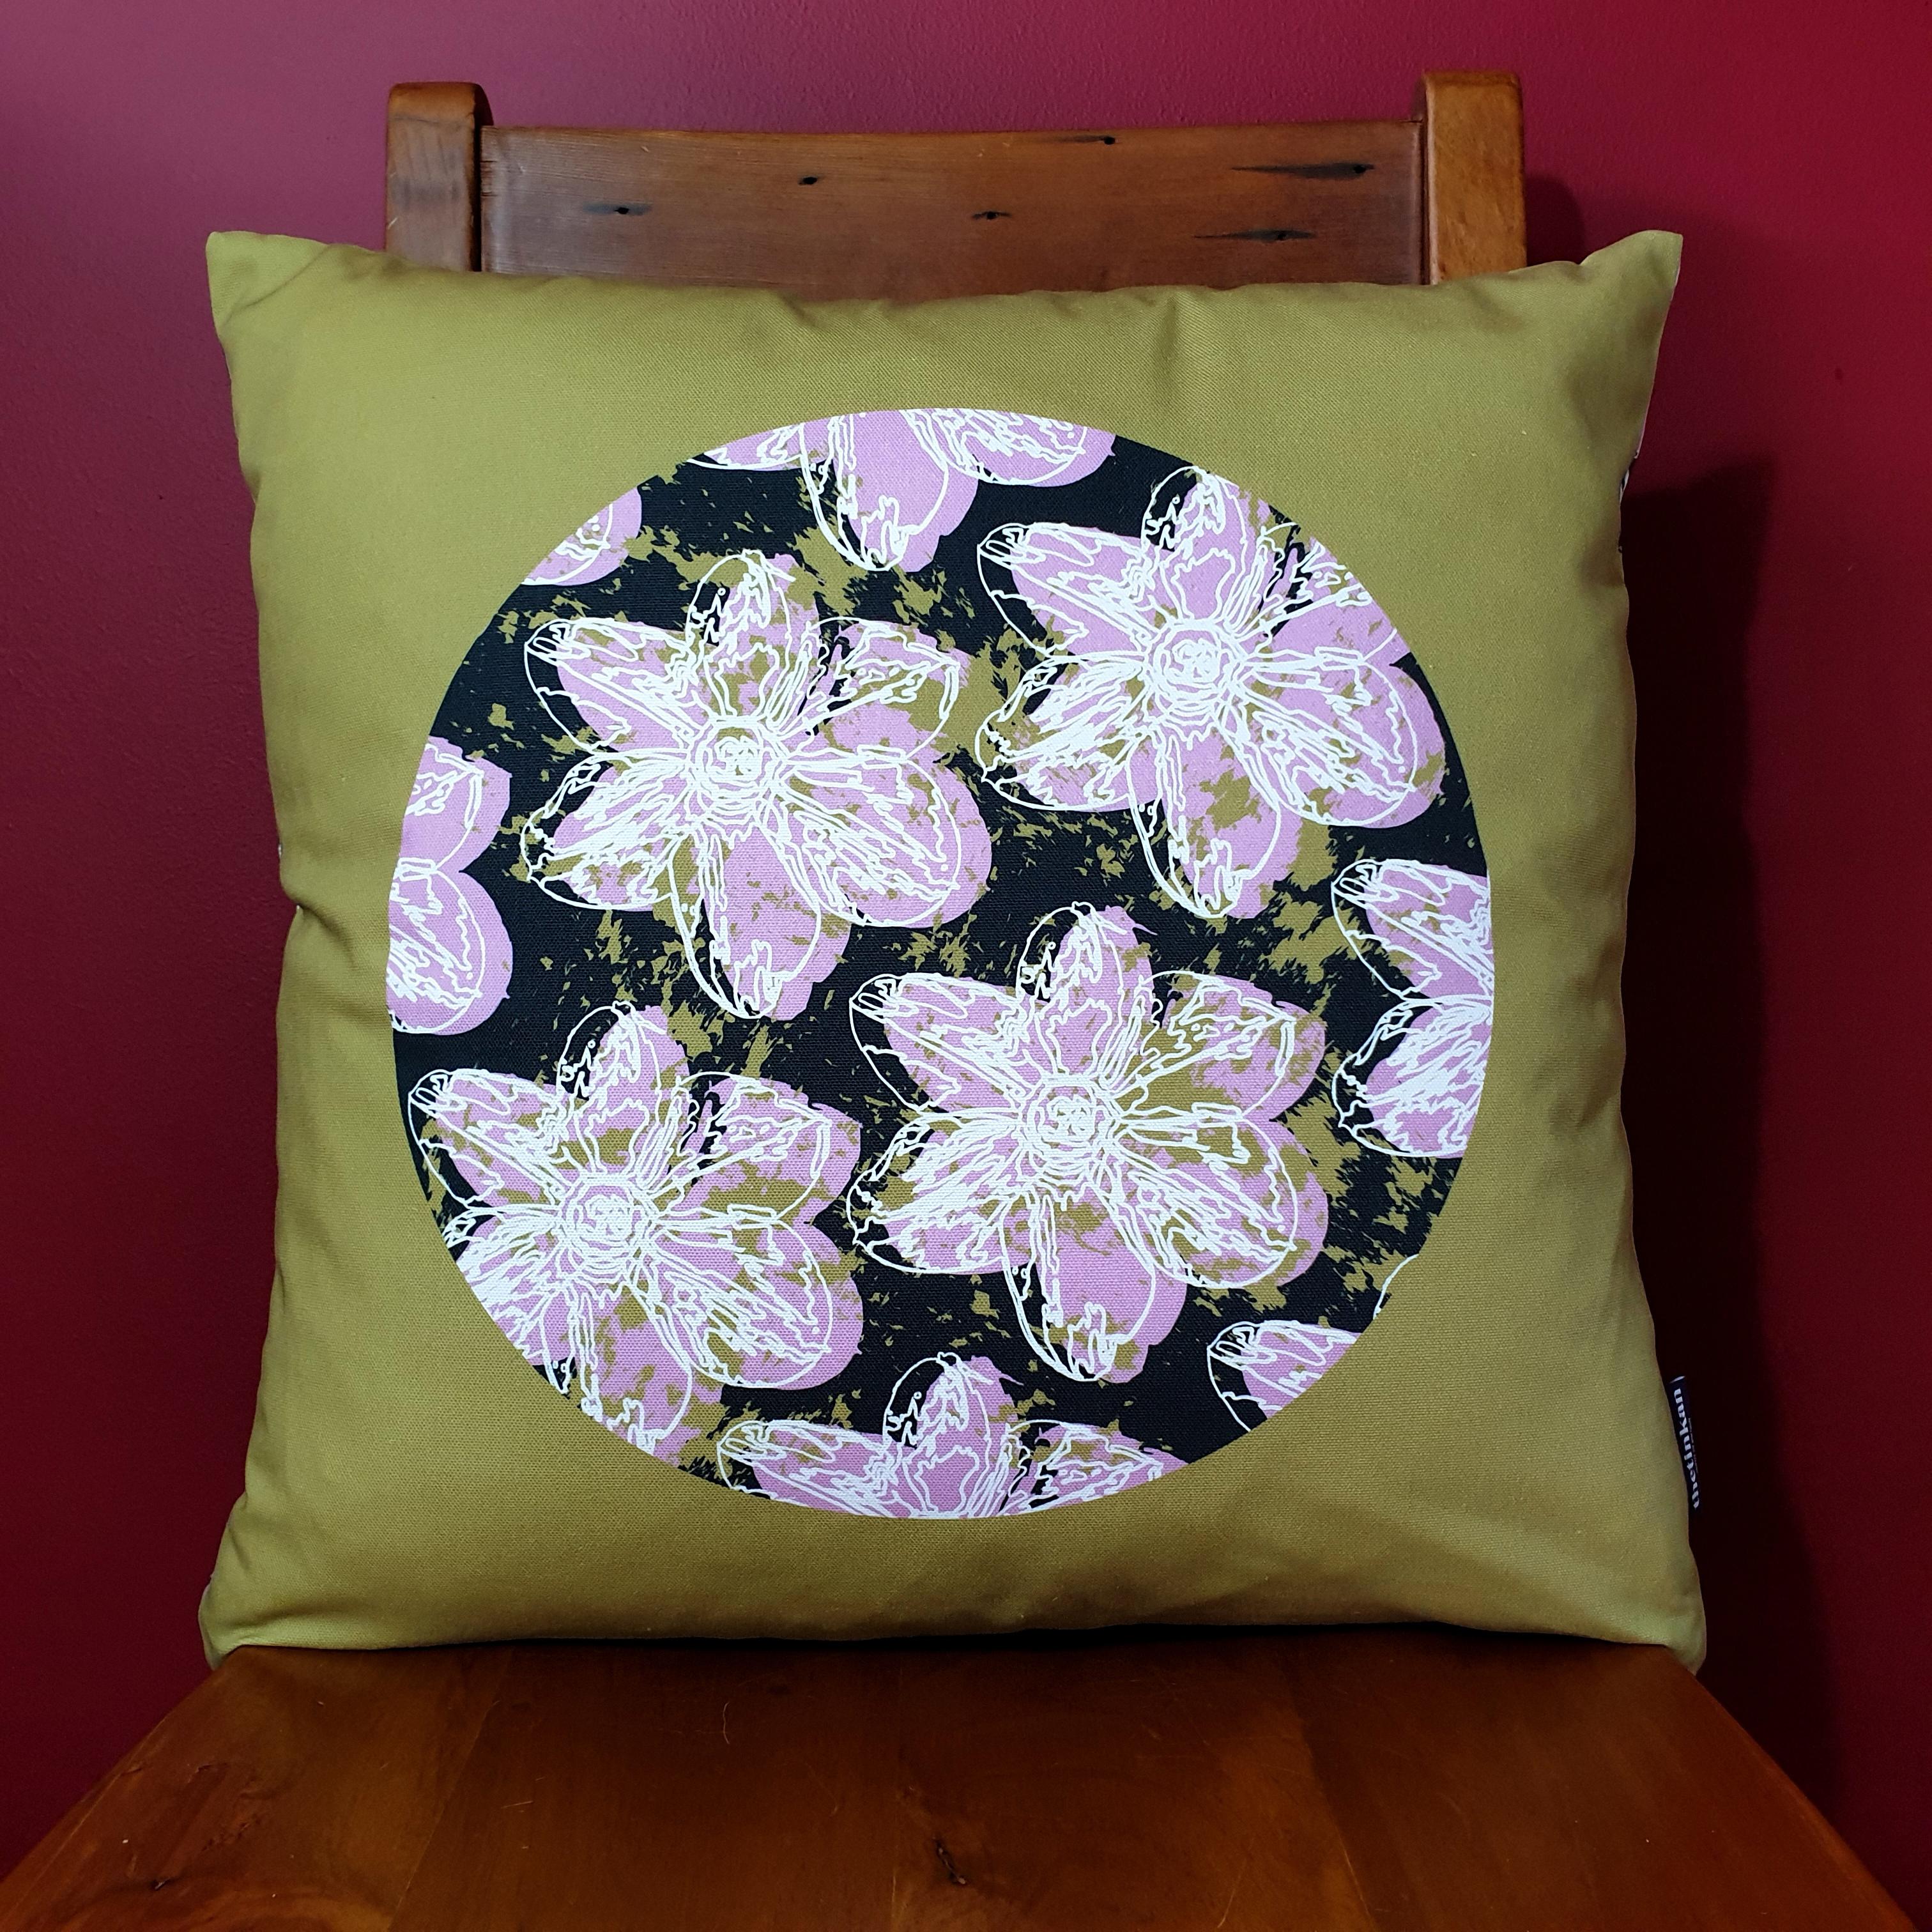 Double-sided 51cm square Flower Splash cushion designed by thetinkan. Candy pink narcissus flower with white traced outline set in a dark charcoal grey coloured circle with olive paint splashes and olive green surround. Available with an optional luxury cushion inner pad. VIEW PRODUCT >>